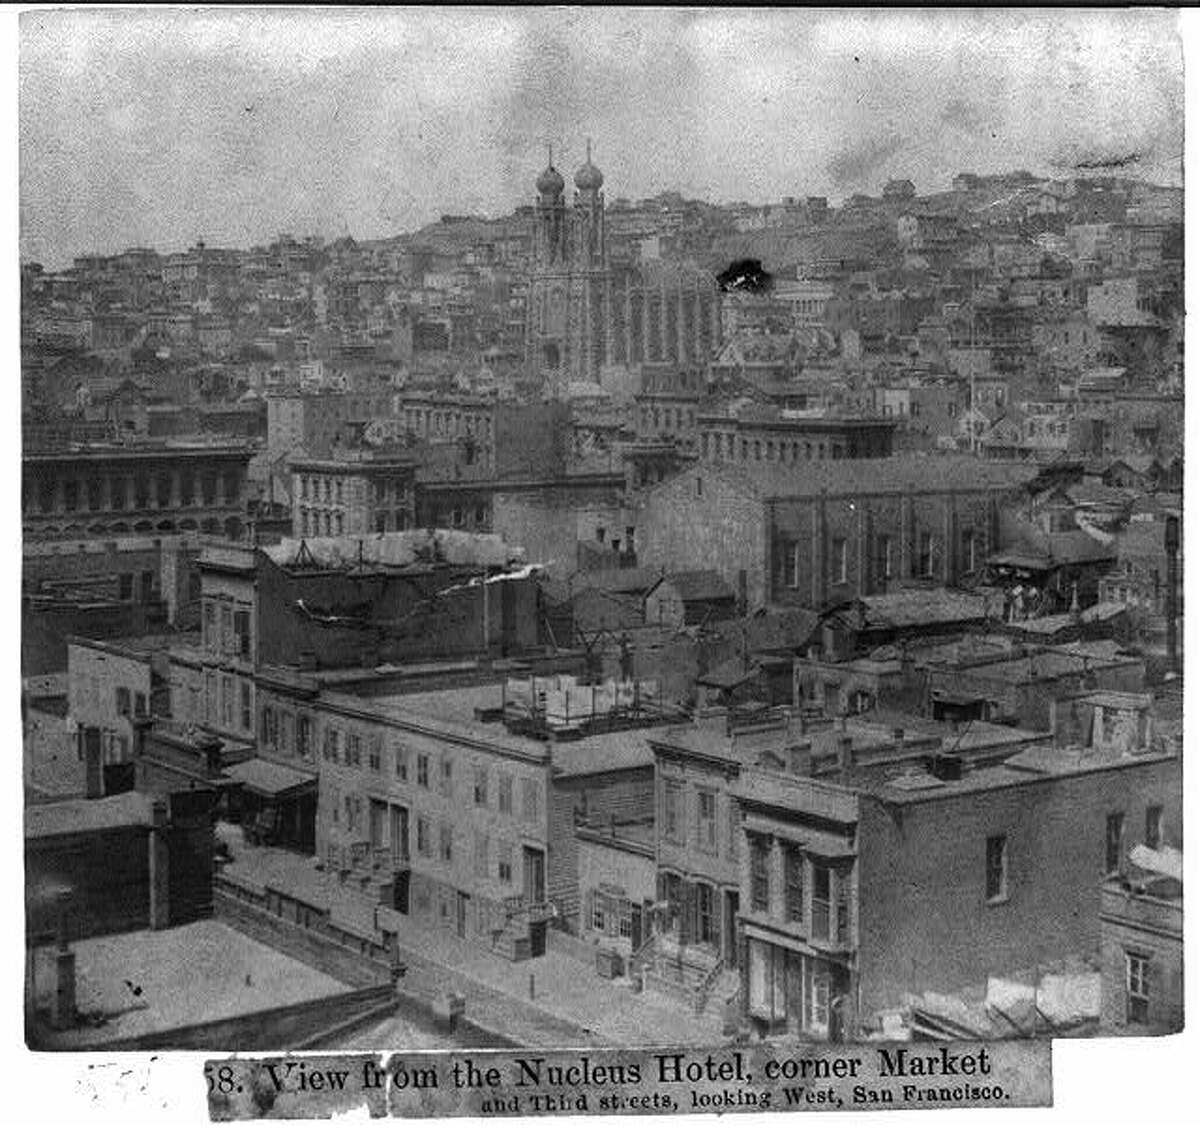 The view from the Nucleus Hotel on the corner of Market St. The five-story hotel was one of the largest brick buildings on Market. It was demolished in the late 1890s and the present-day Hearst Building took its place (which is itself a second iteration since the original was destroyed in the 1906 earthquake and fire).